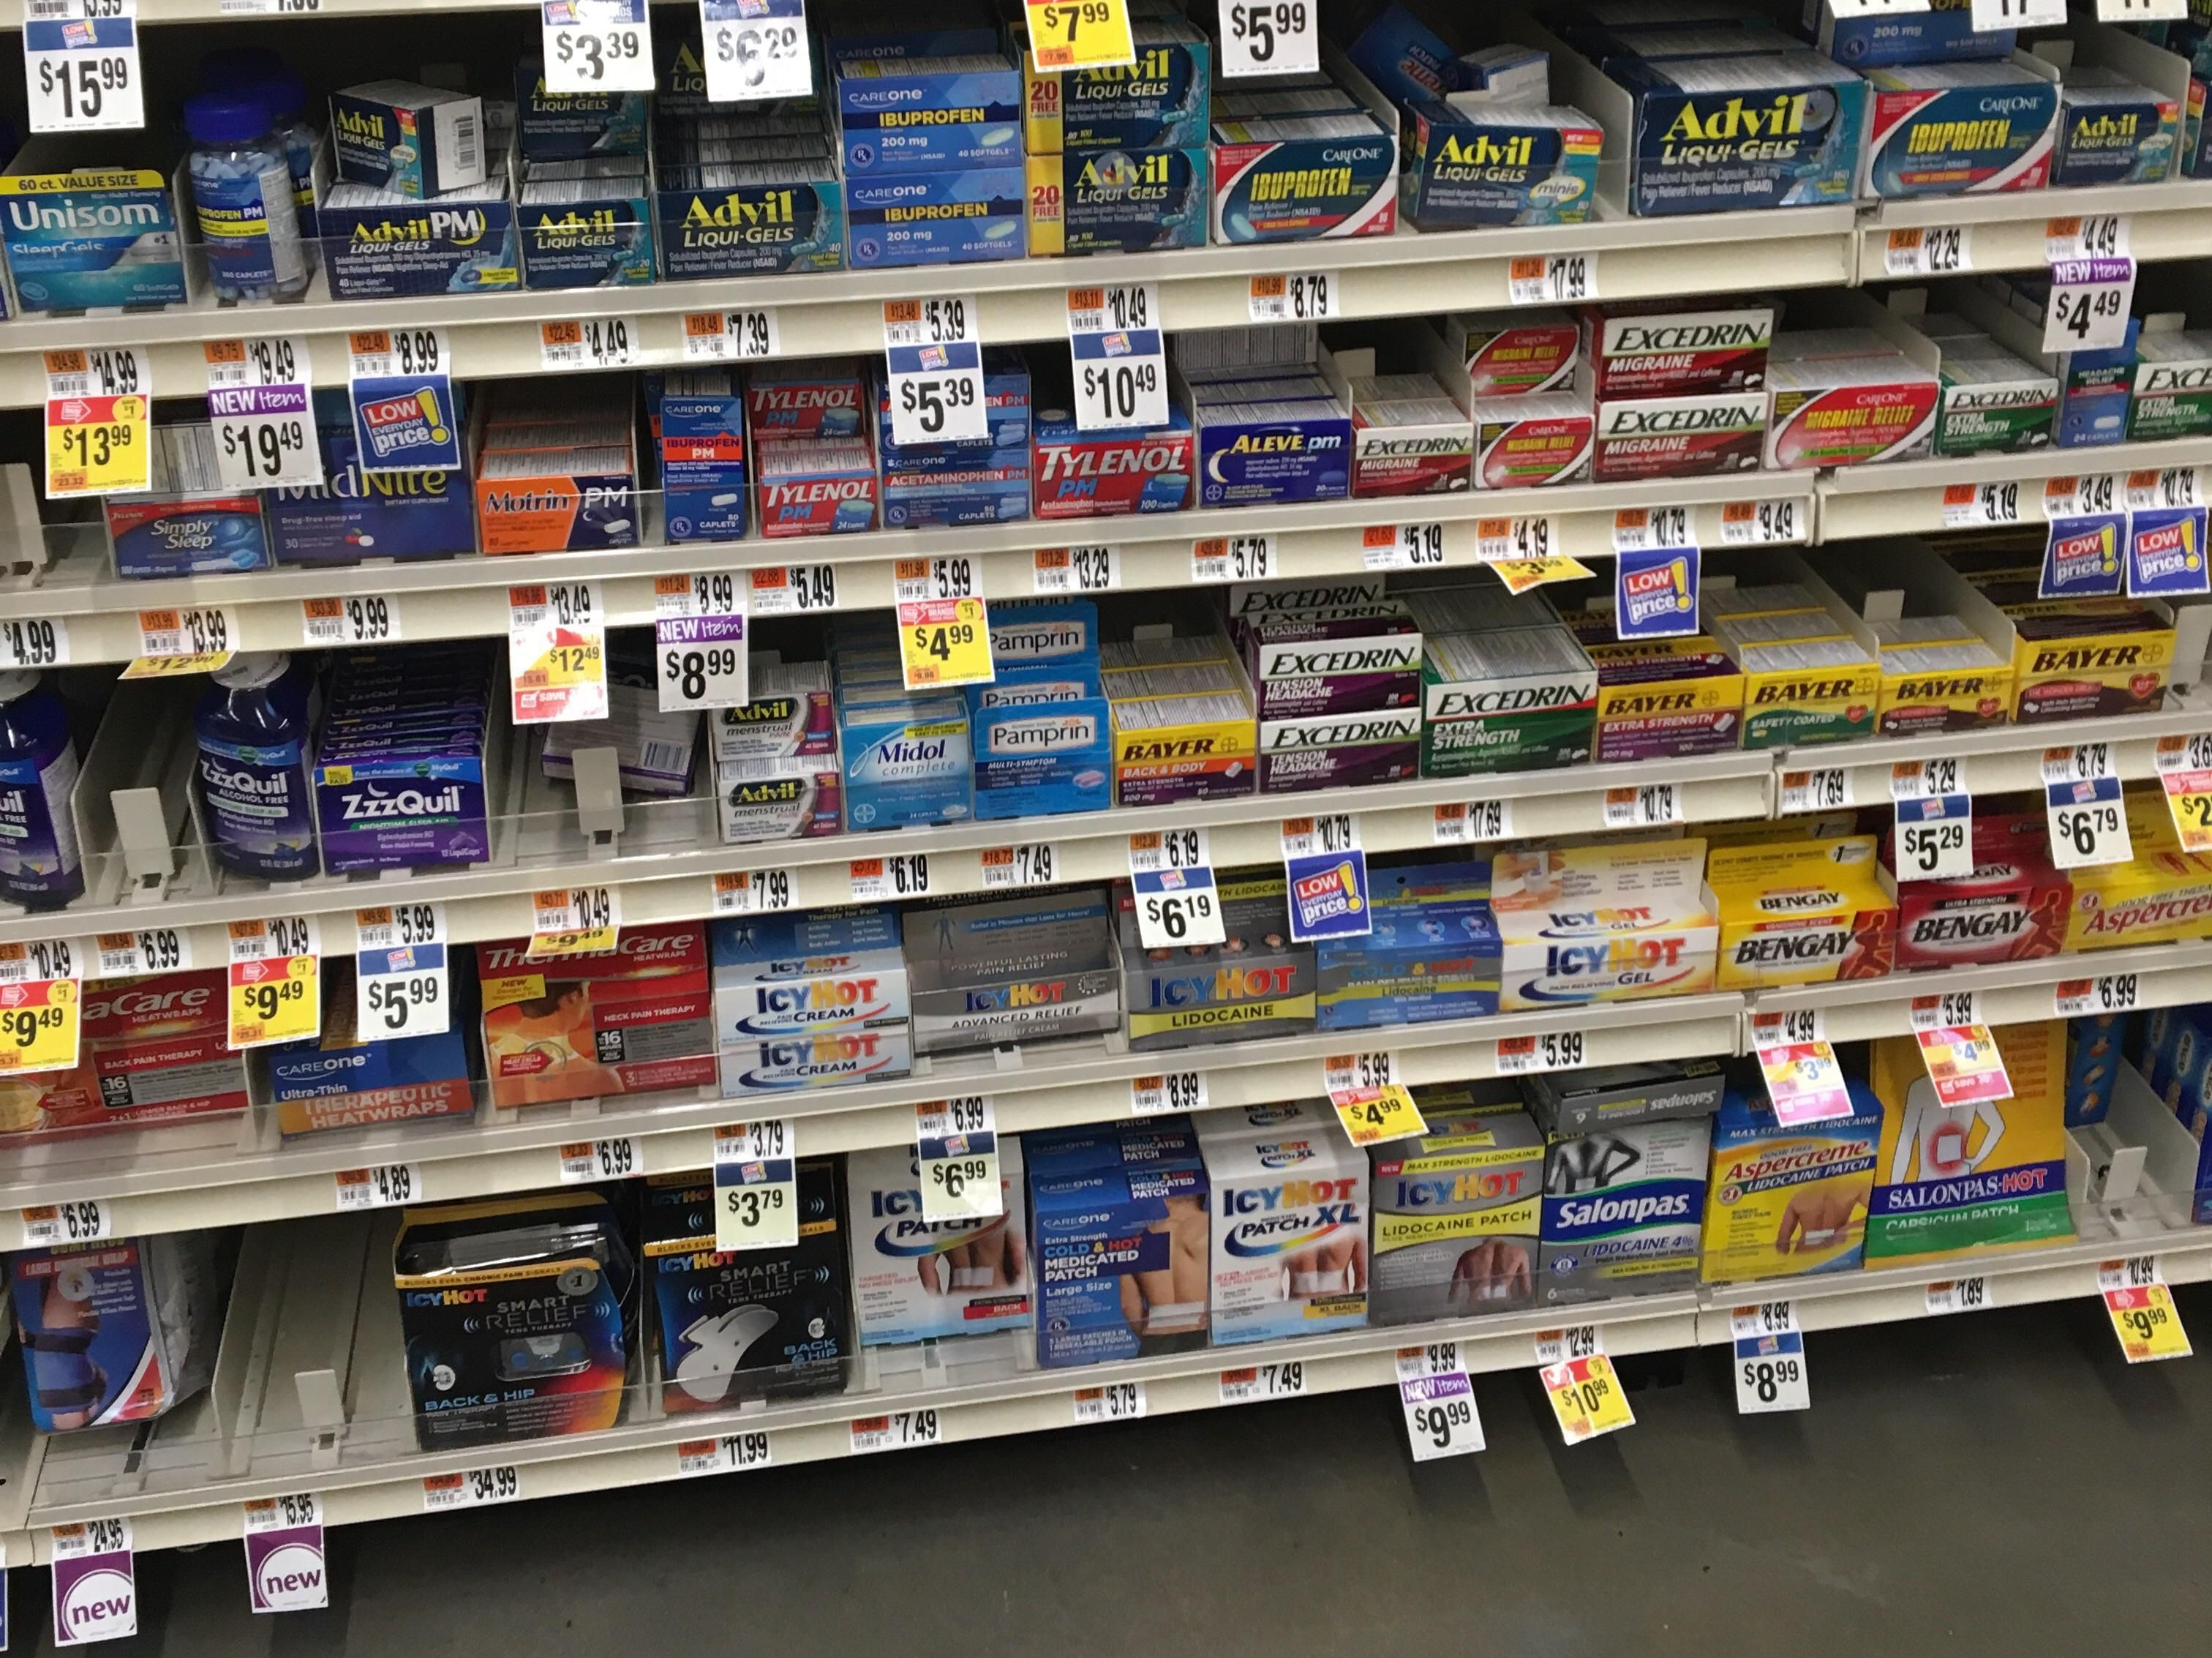 The person who decided to stock back pain relief on the bottom shelf is either an idiot or diabolical.